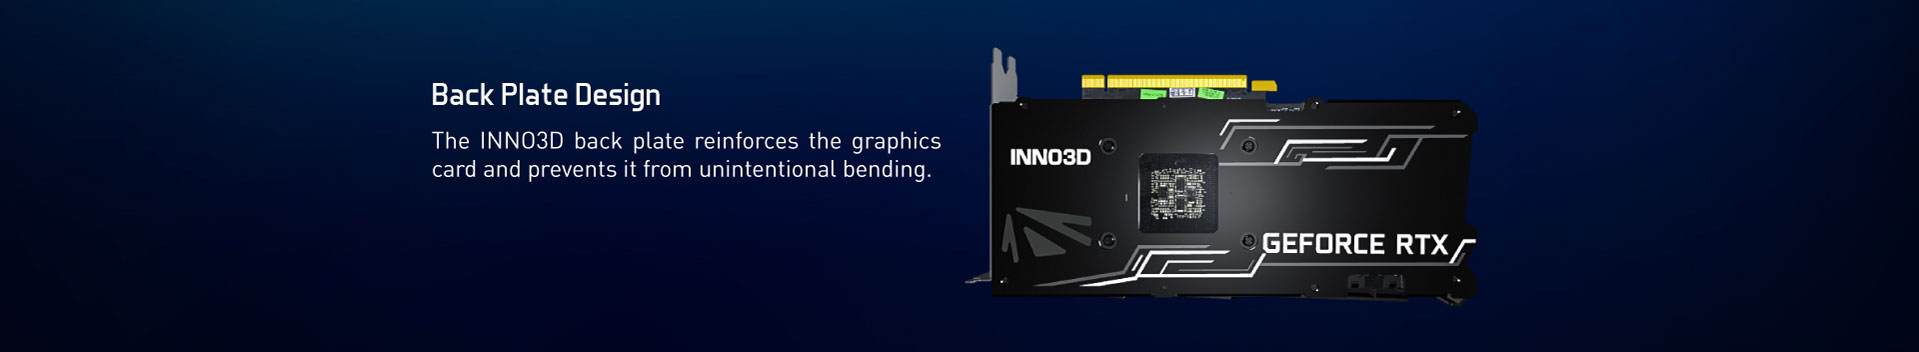 INNO3D - Product Detail